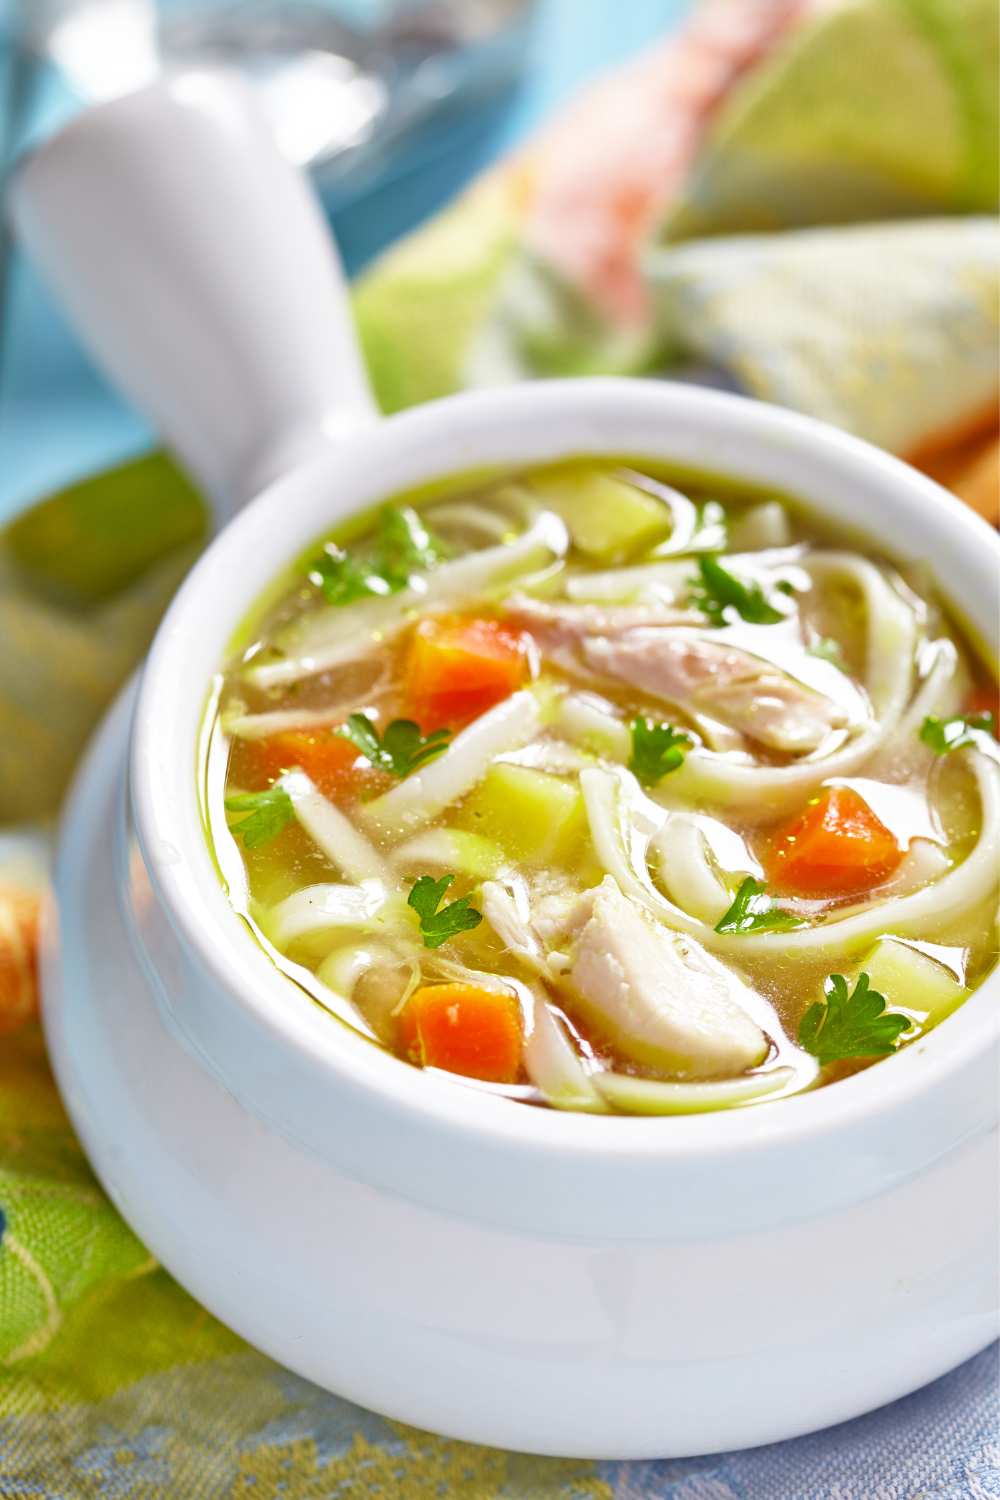 Bobby Flay Chicken Noodle Soup - Delish Sides